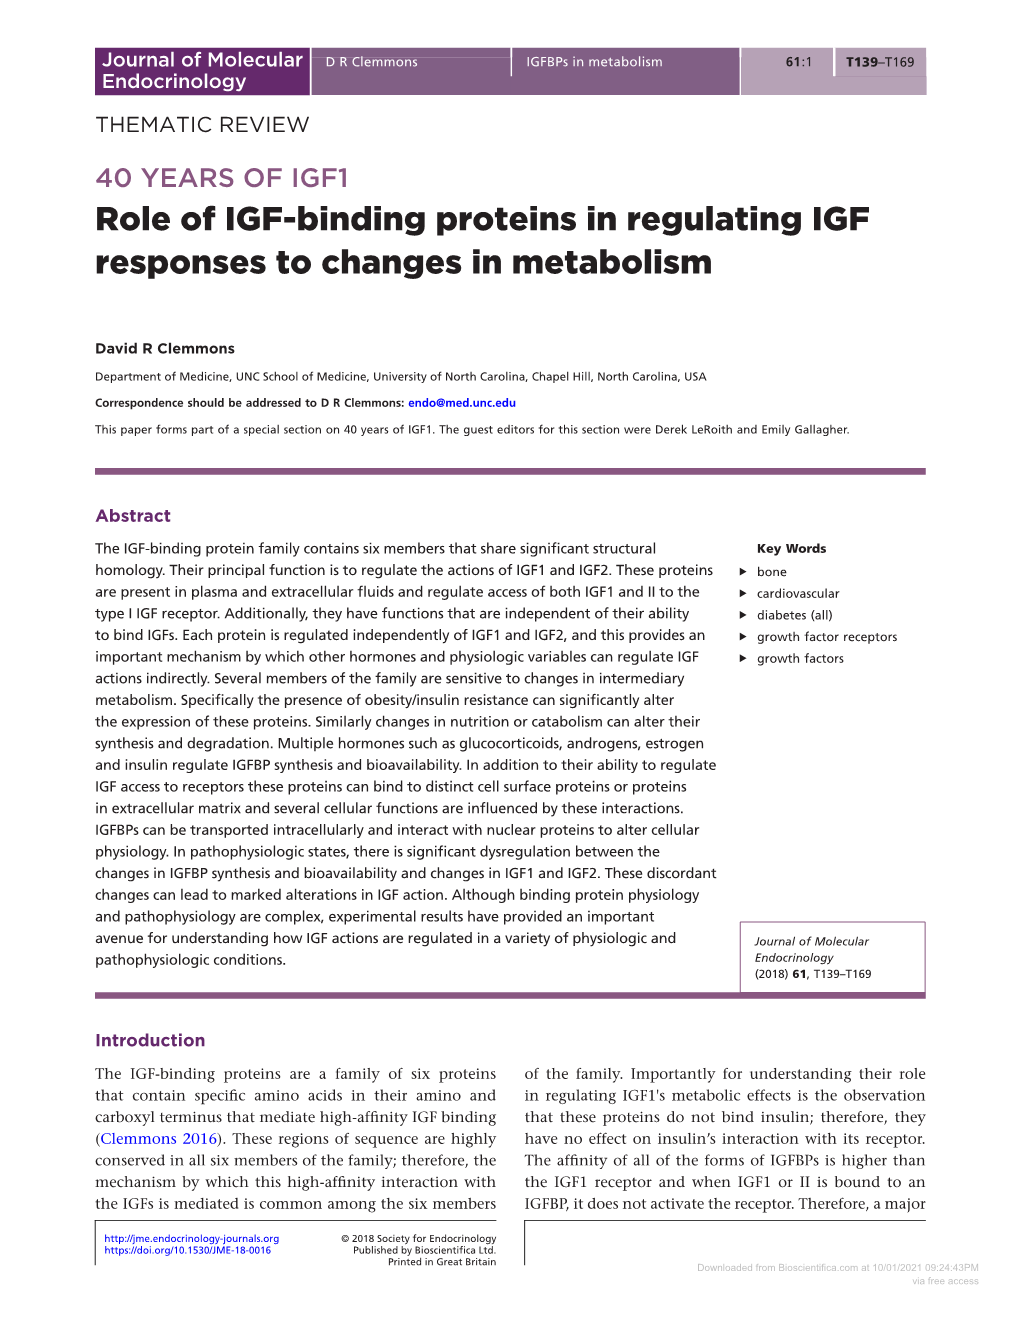 Role of IGF-Binding Proteins in Regulating IGF Responses to Changes in Metabolism